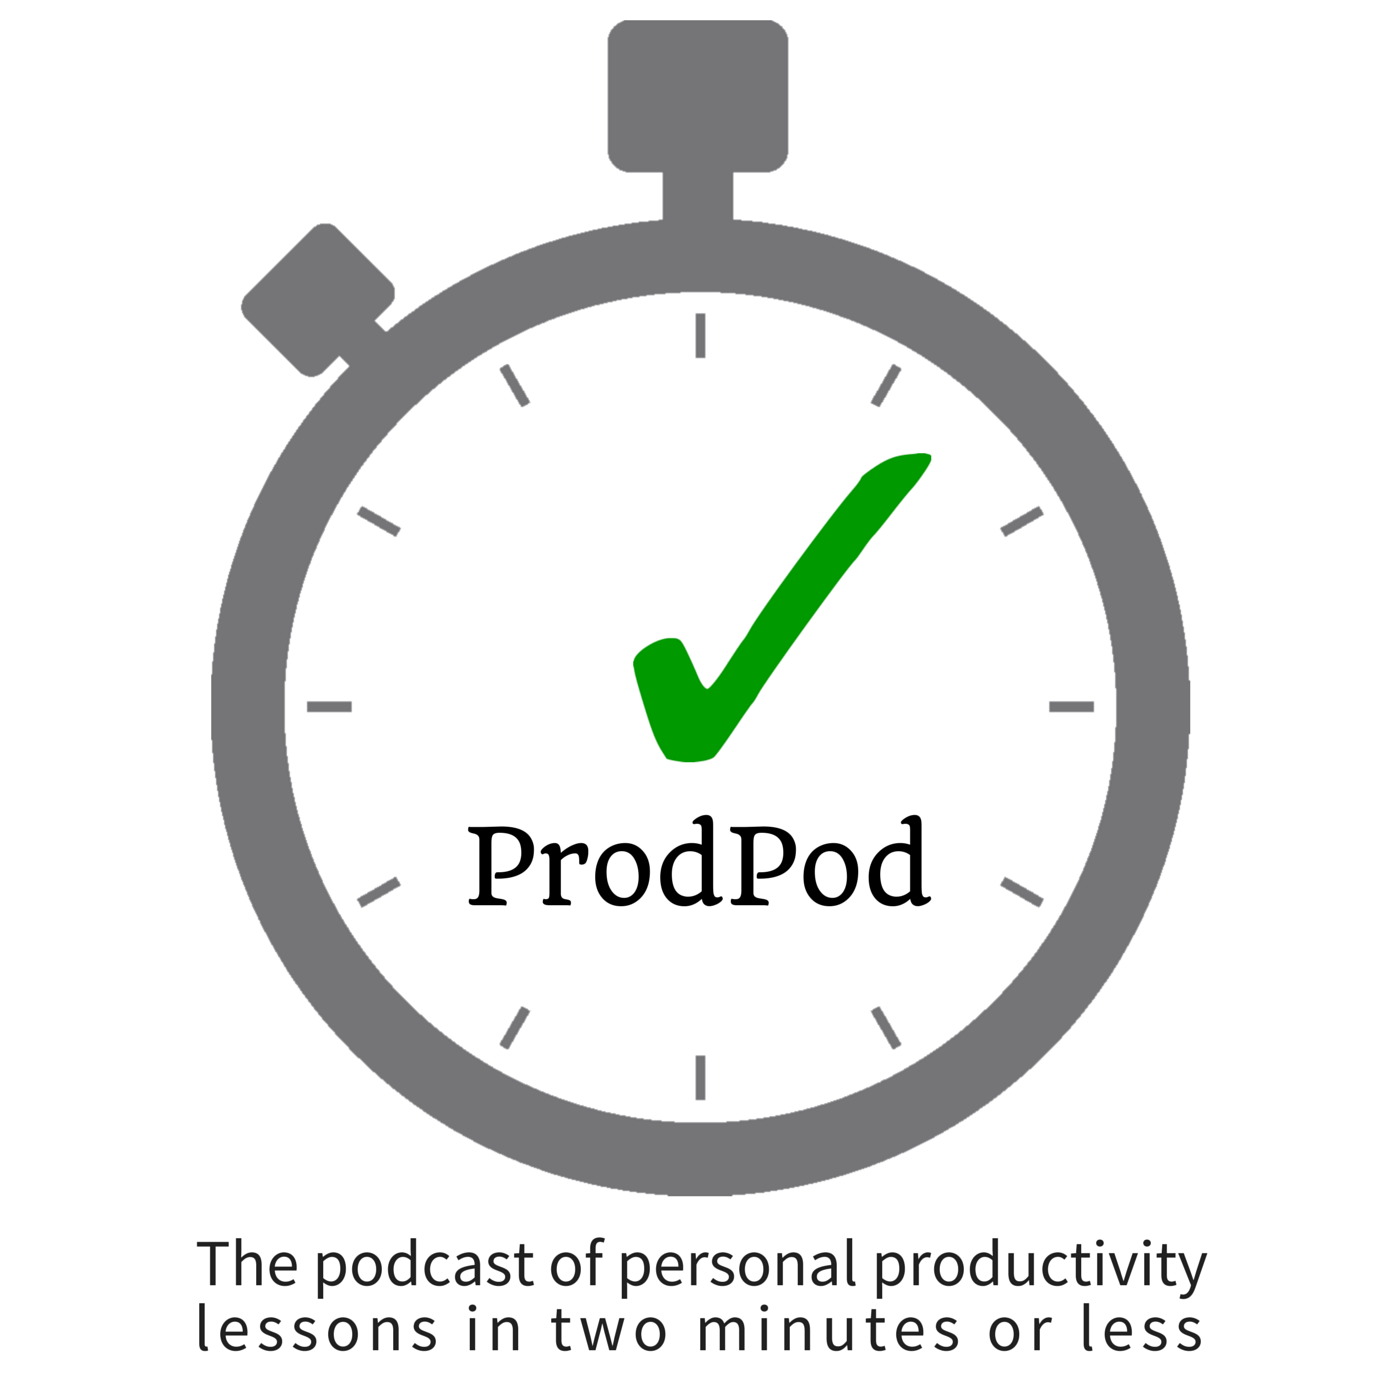 ProdPod: Episode 86 -- The Kaizen Way: What Are the Elements of Kaizen? with Sally Reinholdt (Part 2 of 2)